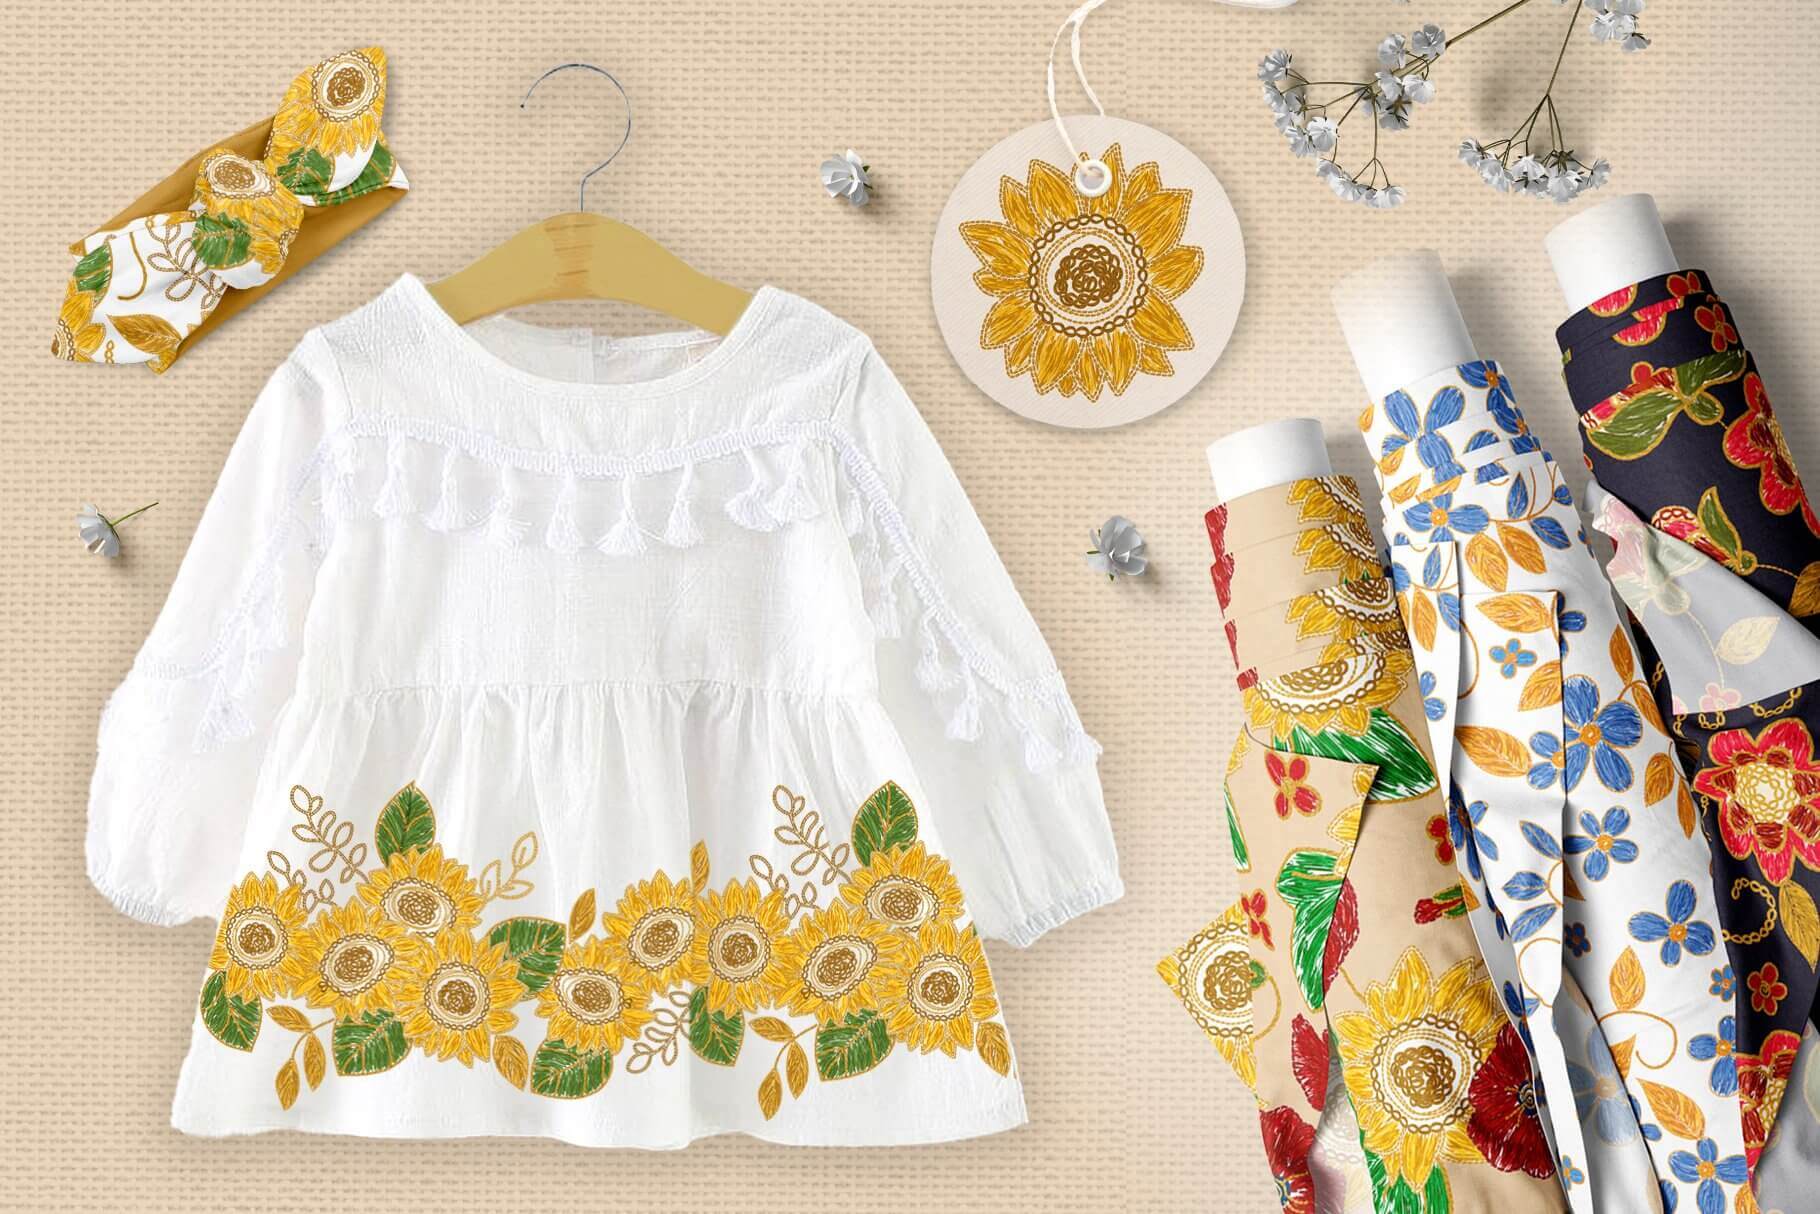 Yellow sunflowers with spikelets and green leaves are embroidered on a white shirt.